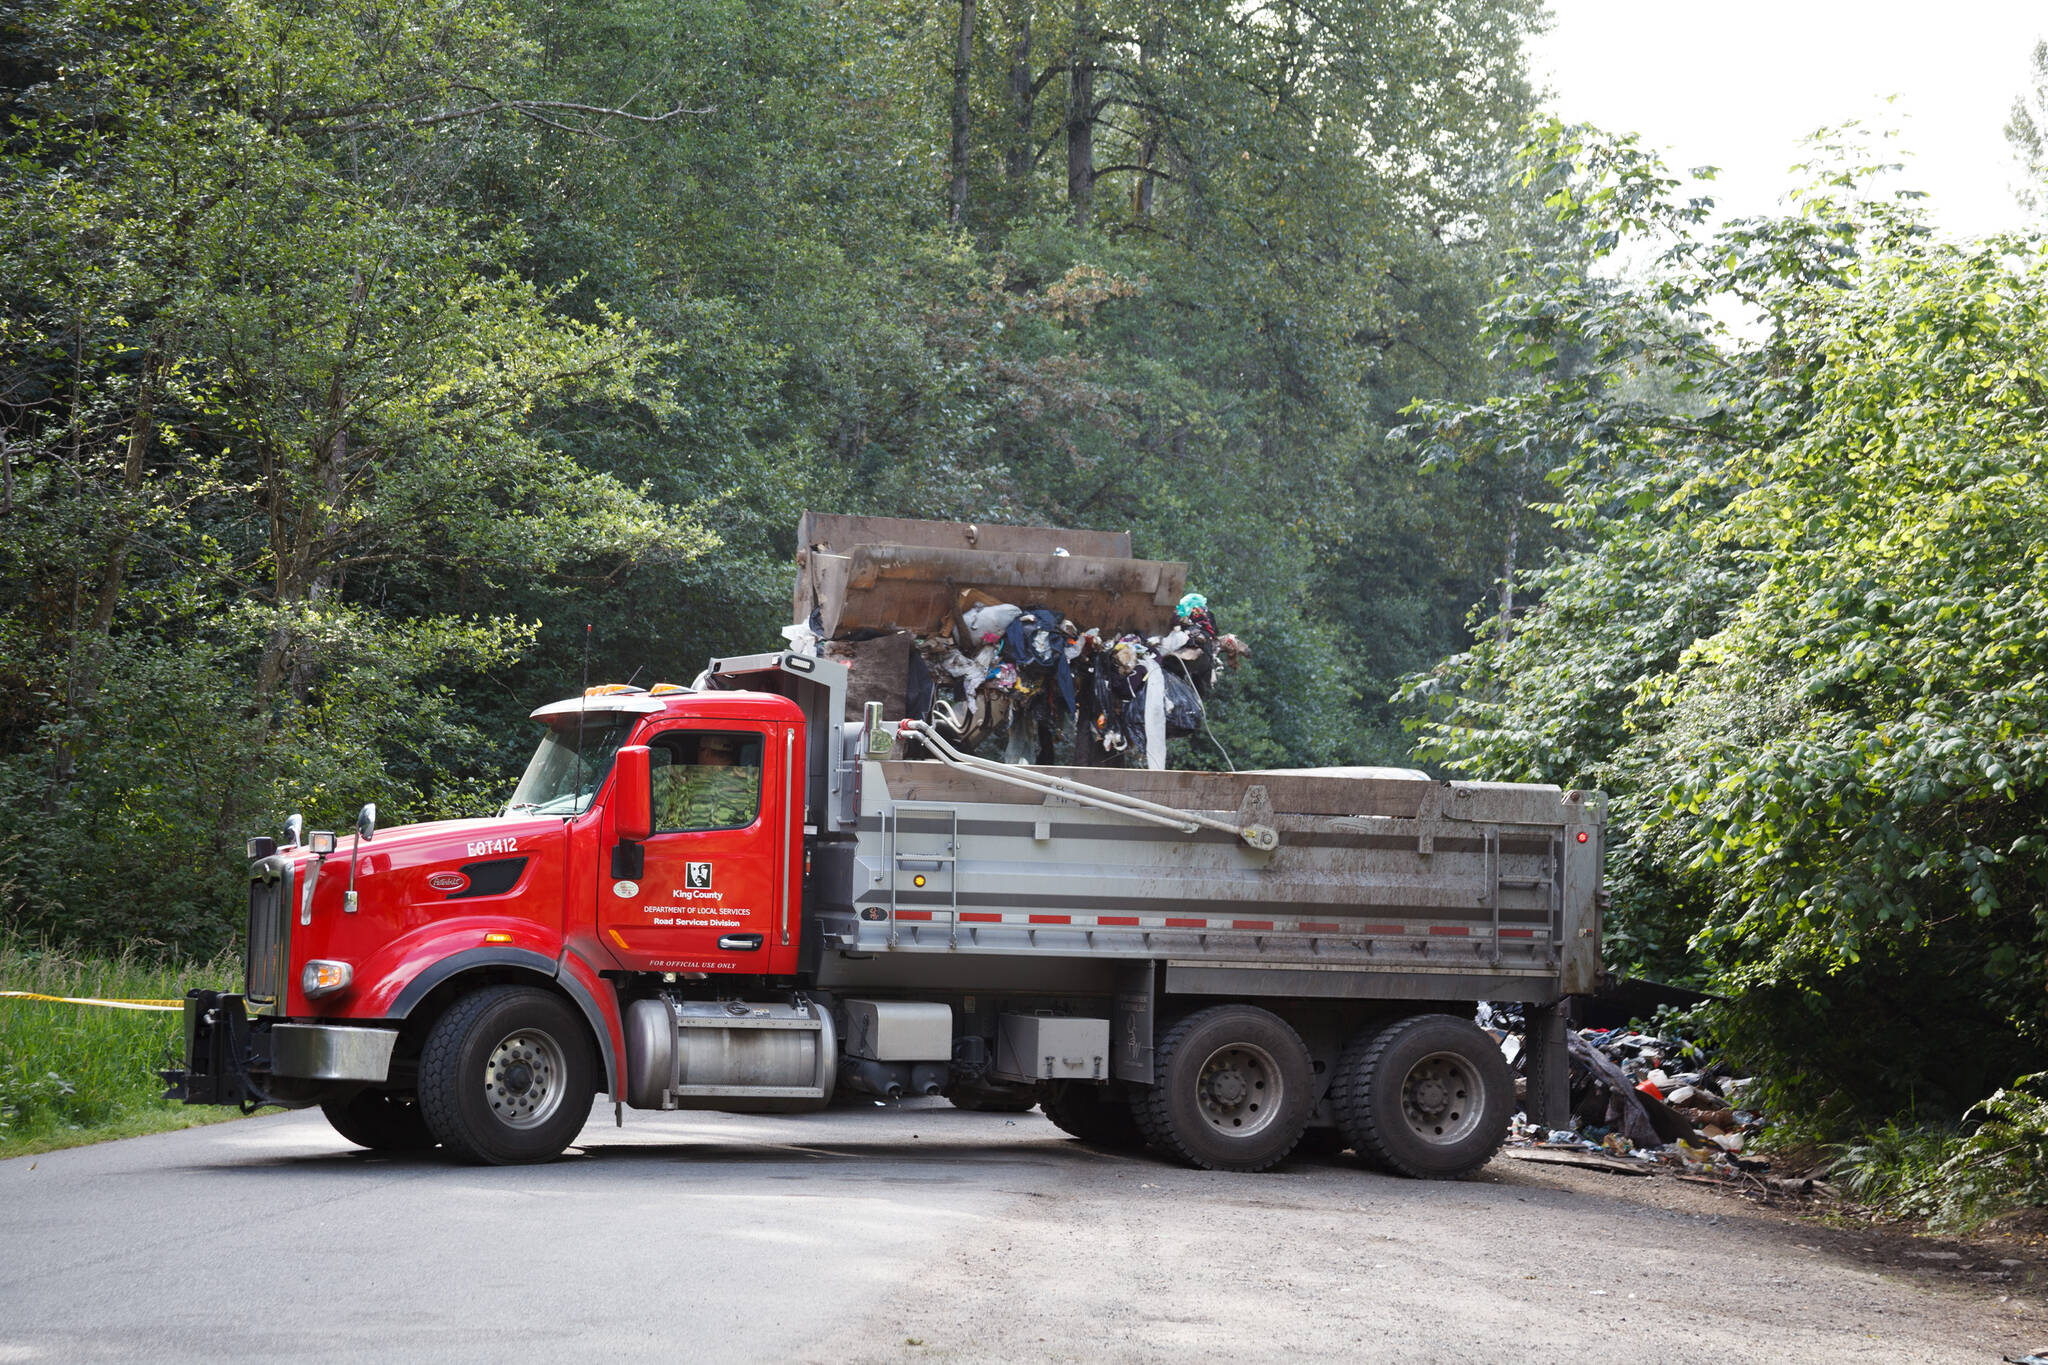 County workers cleaned trash and debris from homeless encampments and illegal dumping July 13 along the Green River Road in unincorporated King County. HENRY STEWART-WOOD, Sound Publishing